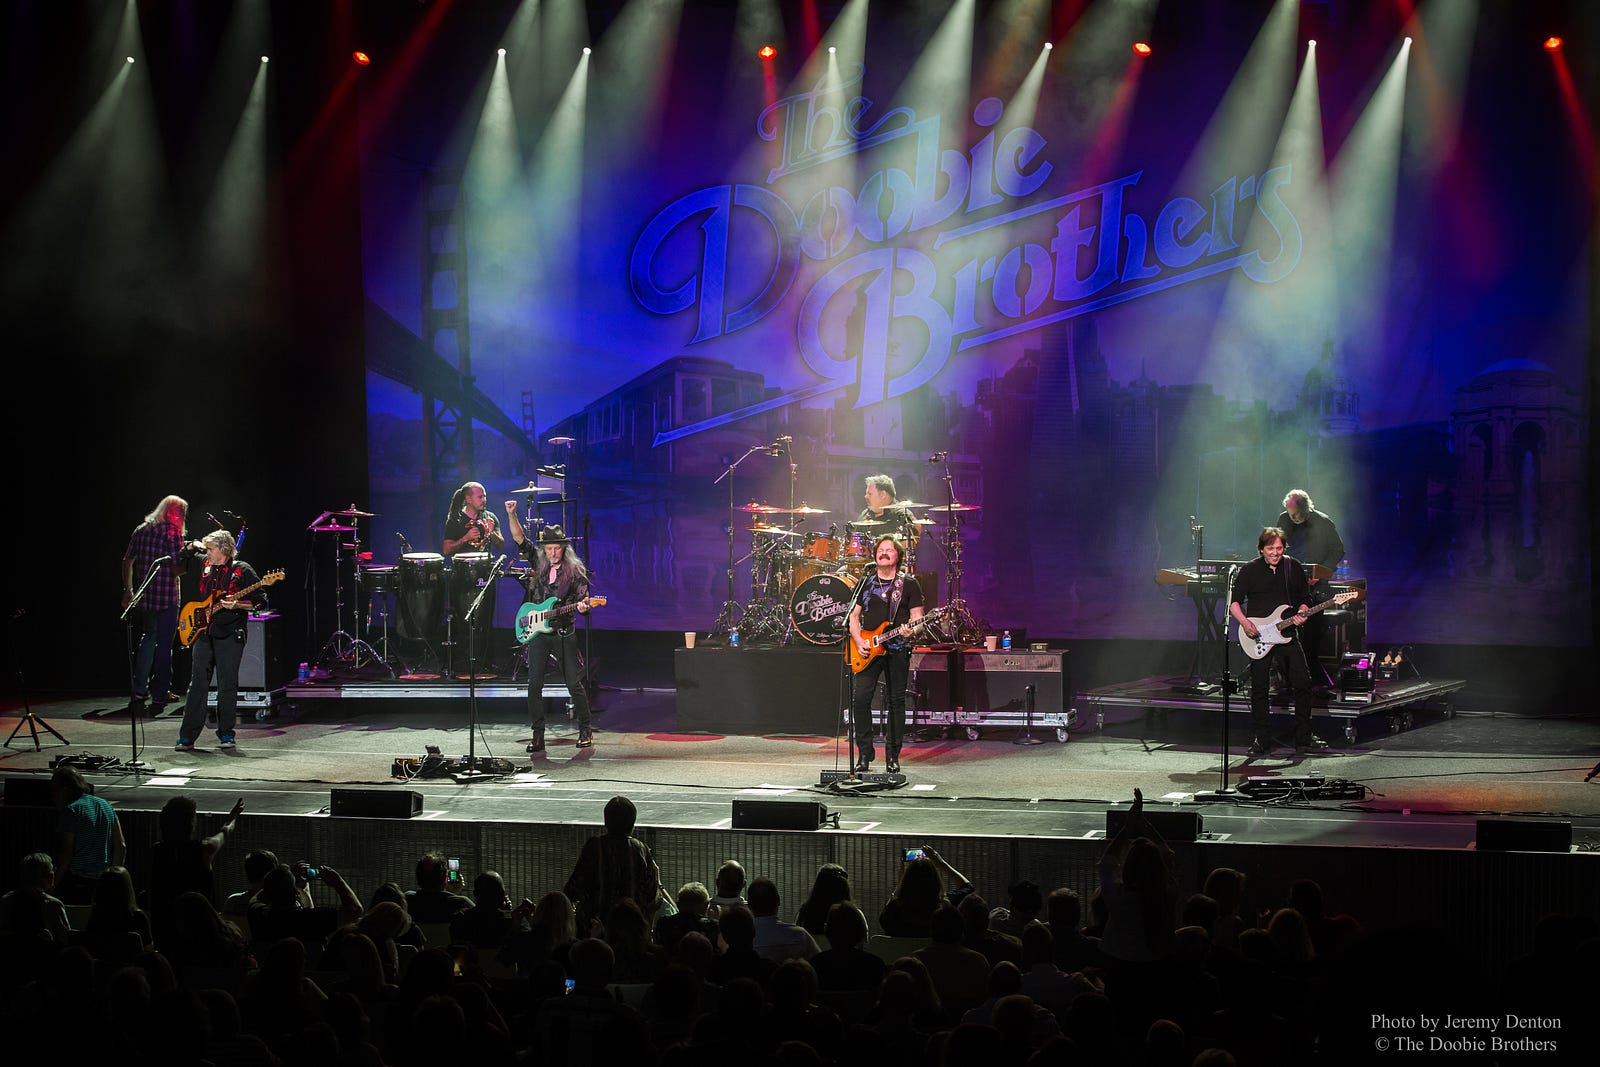 The Doobie Brothers going deep this tour; wow soldout opening night crowd